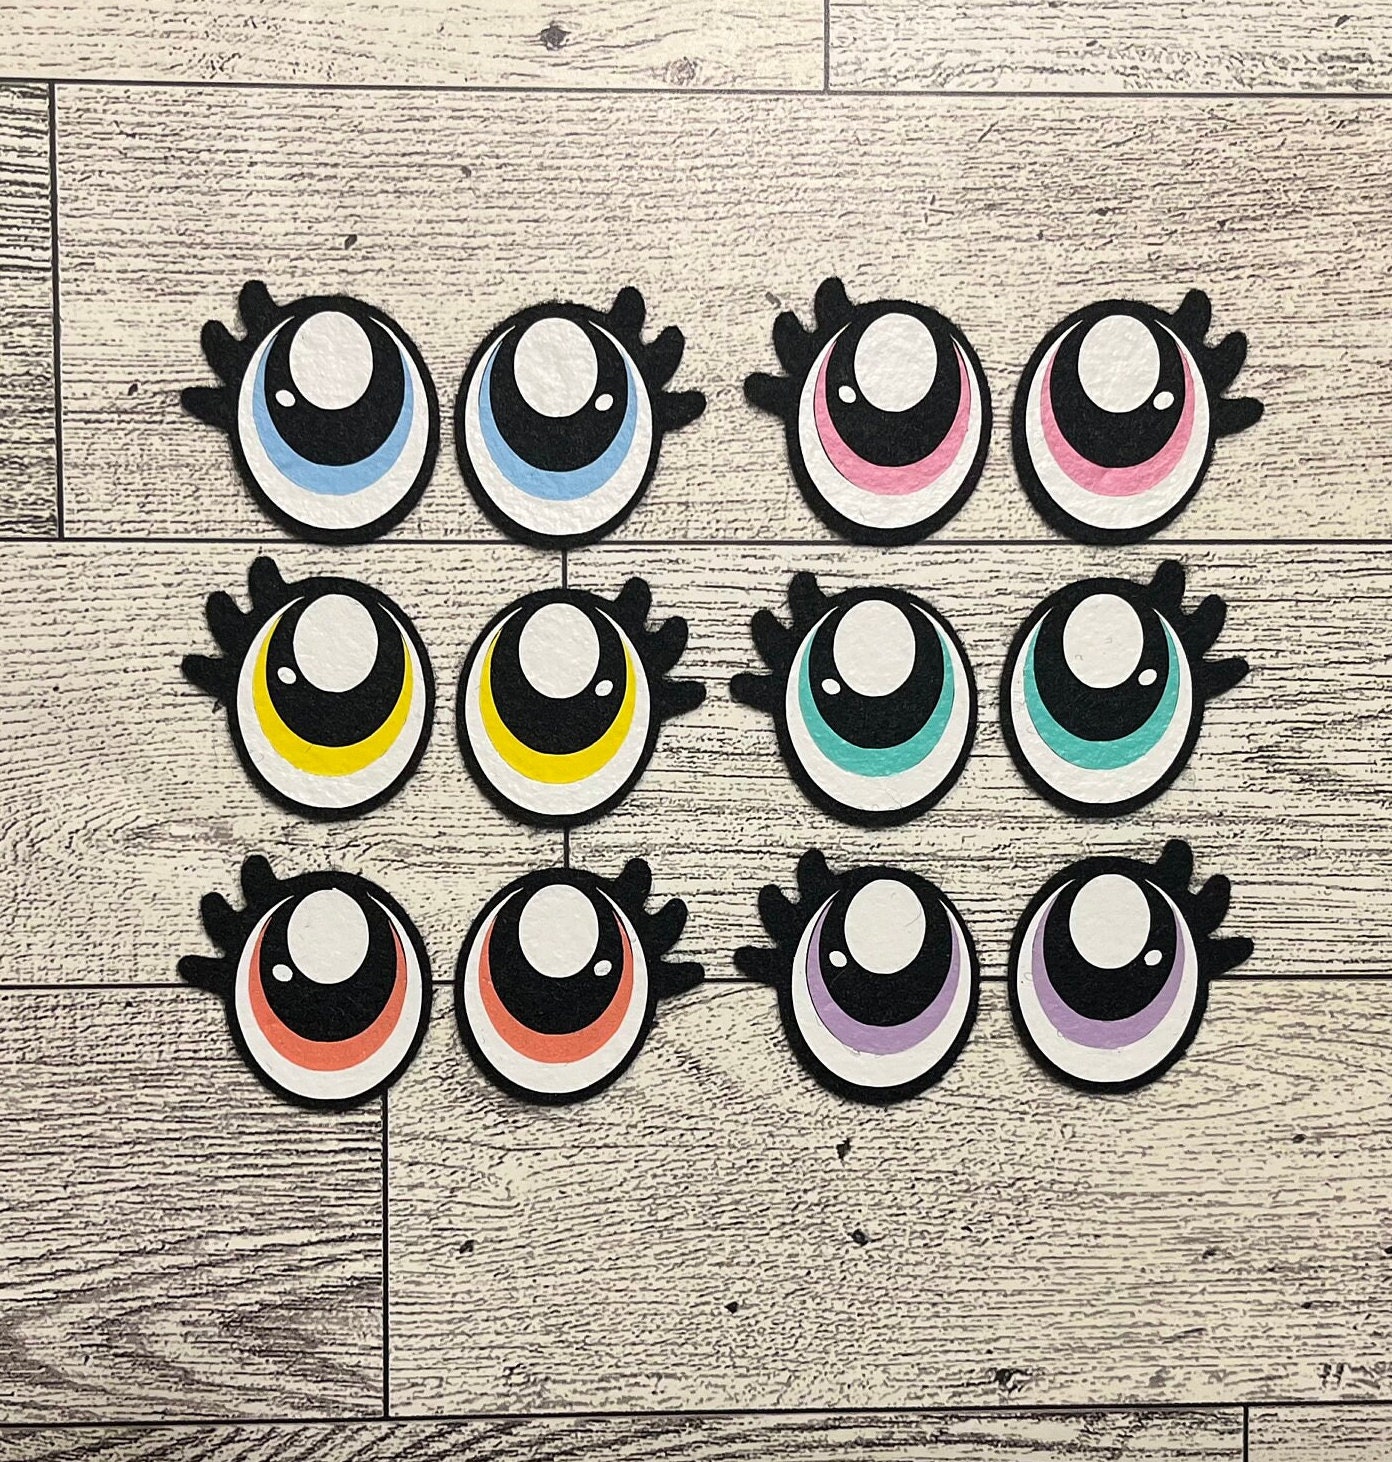 8mm Kawaii Style Round Safety Eyes and Washers: 5 Pairs Doll / Amigurumi /  Animal / Stuffed Creation / Toy / Crochet / Knit / Supplies 